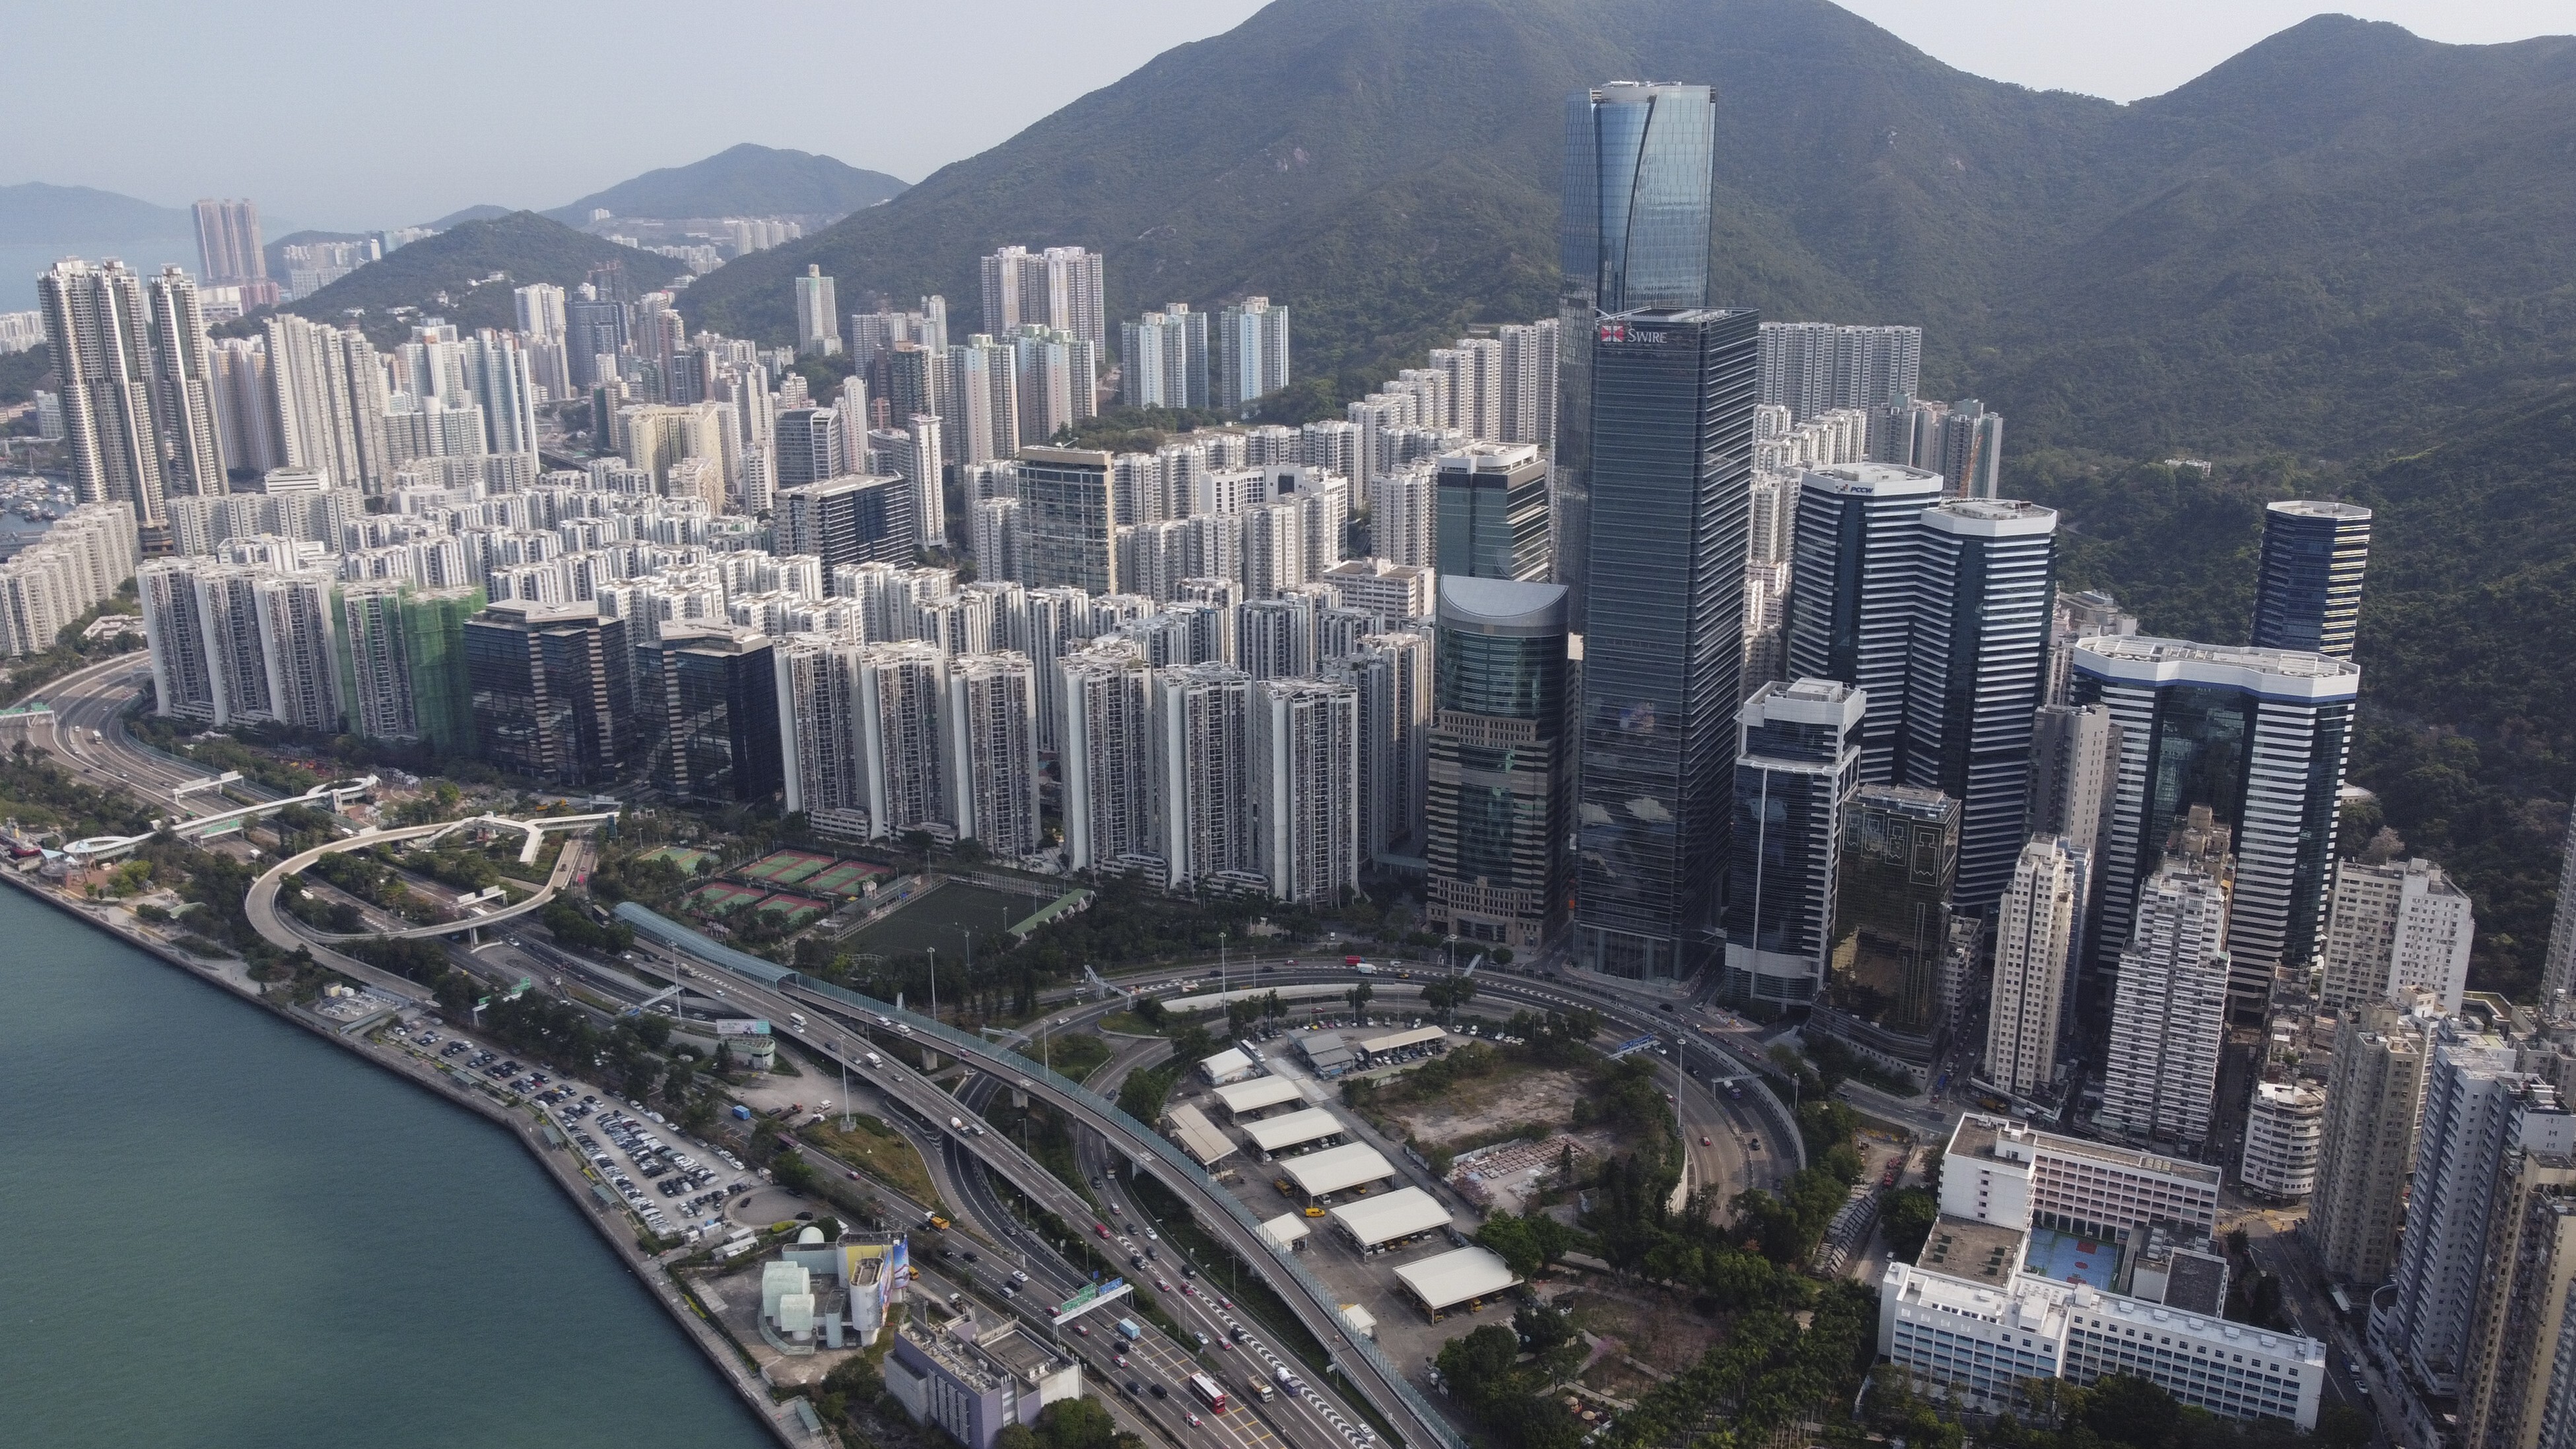 Some companies have left Central to take up space in non-core districts such as Causeway Bay, Quarry Bay (pictured) and Tsim Sha Tsui. Photo: Martin Chan